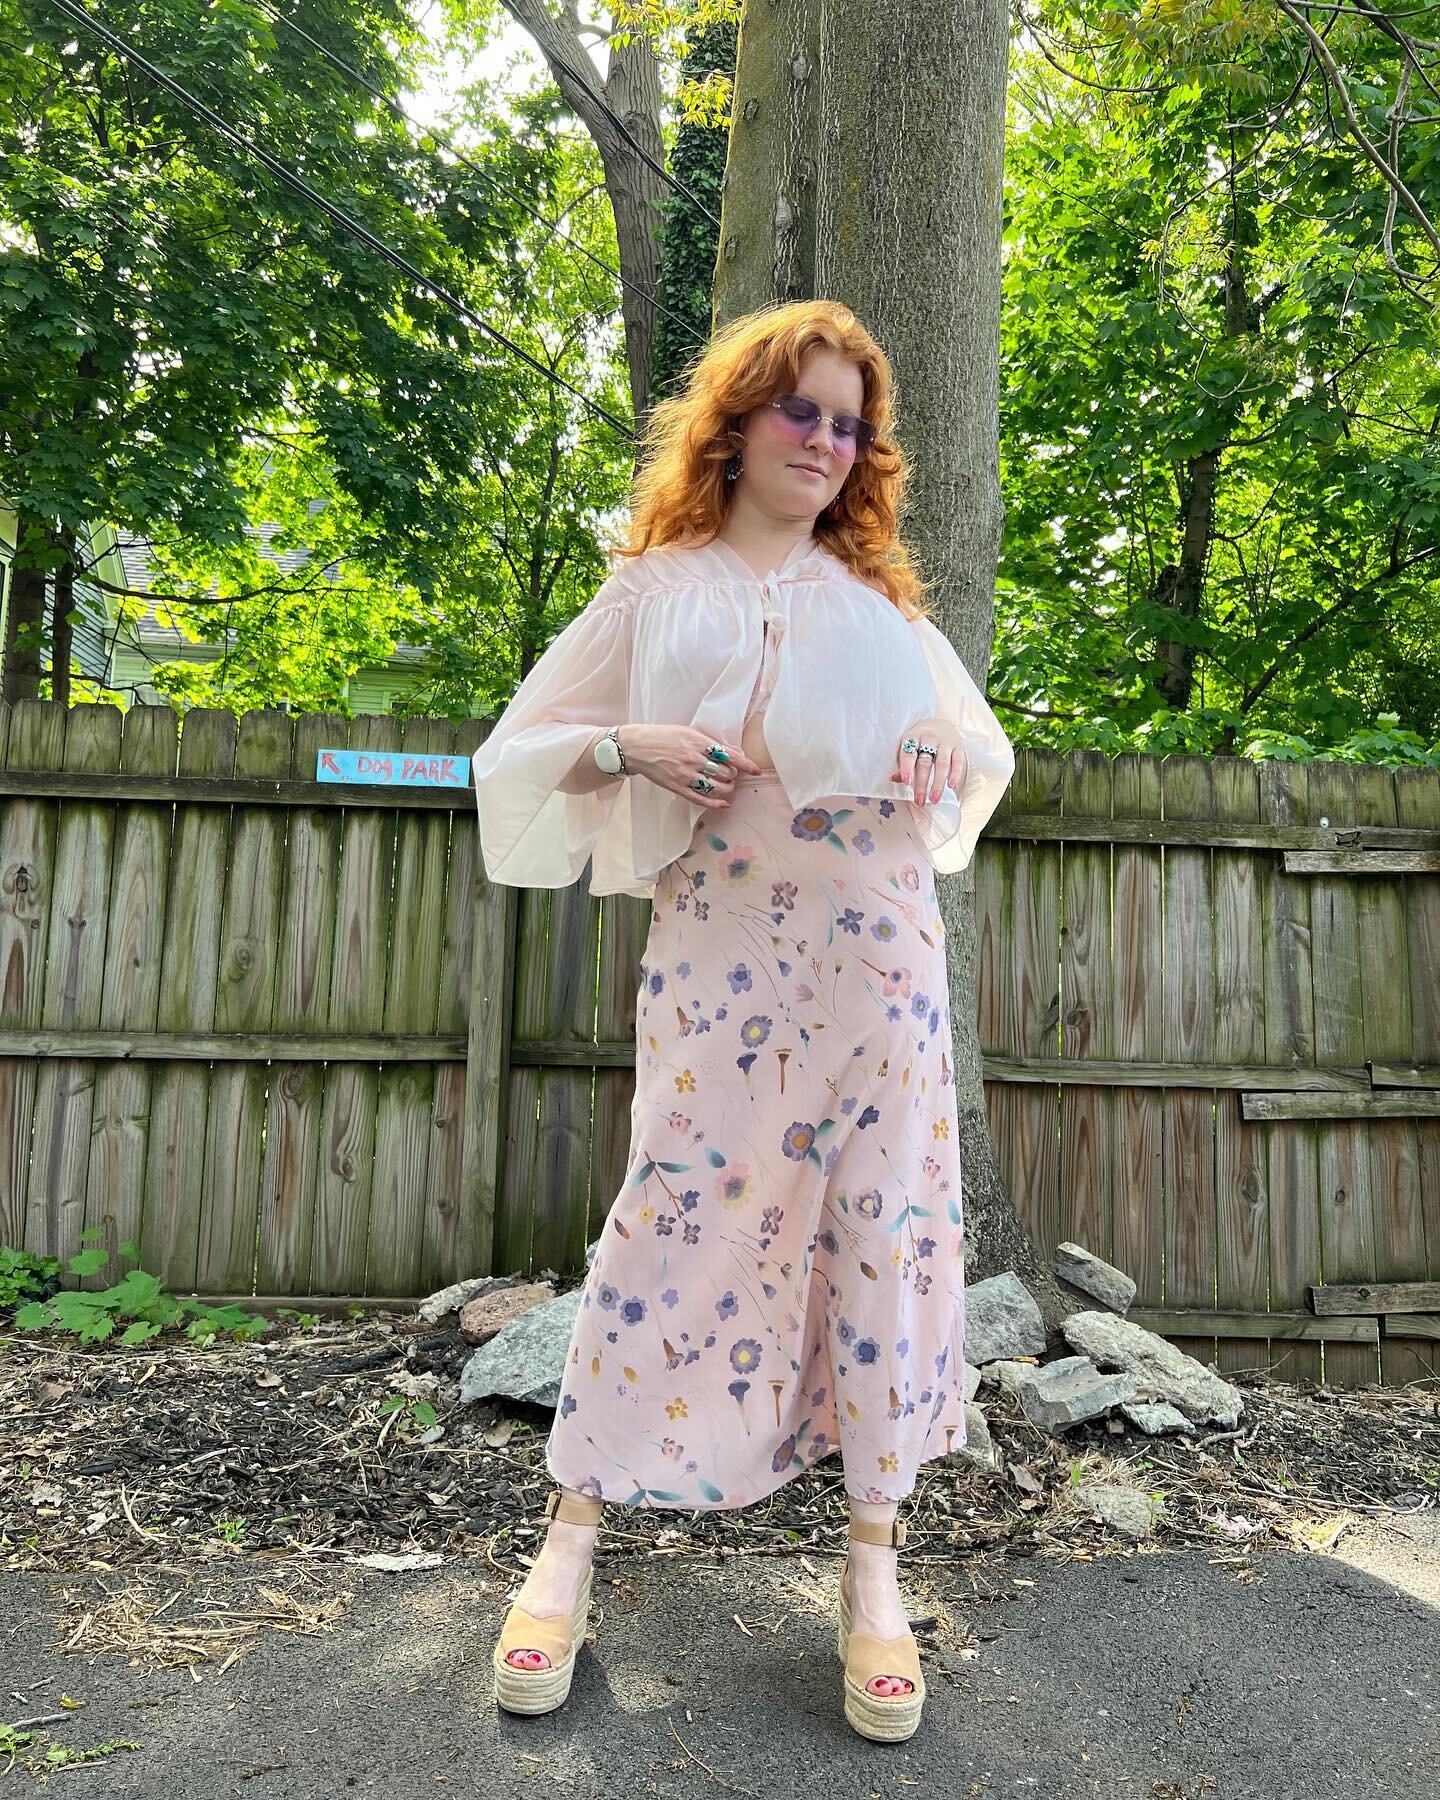 Lots of dreamy pastels like these in store 🌸
&bull;
&bull;
&bull;
Vintage top SOLD
Vintage skirt 28&rdquo; waist $24
Soludos sandals 6.5, run small $55
Sunglasses $14
Call or DM to purchase!